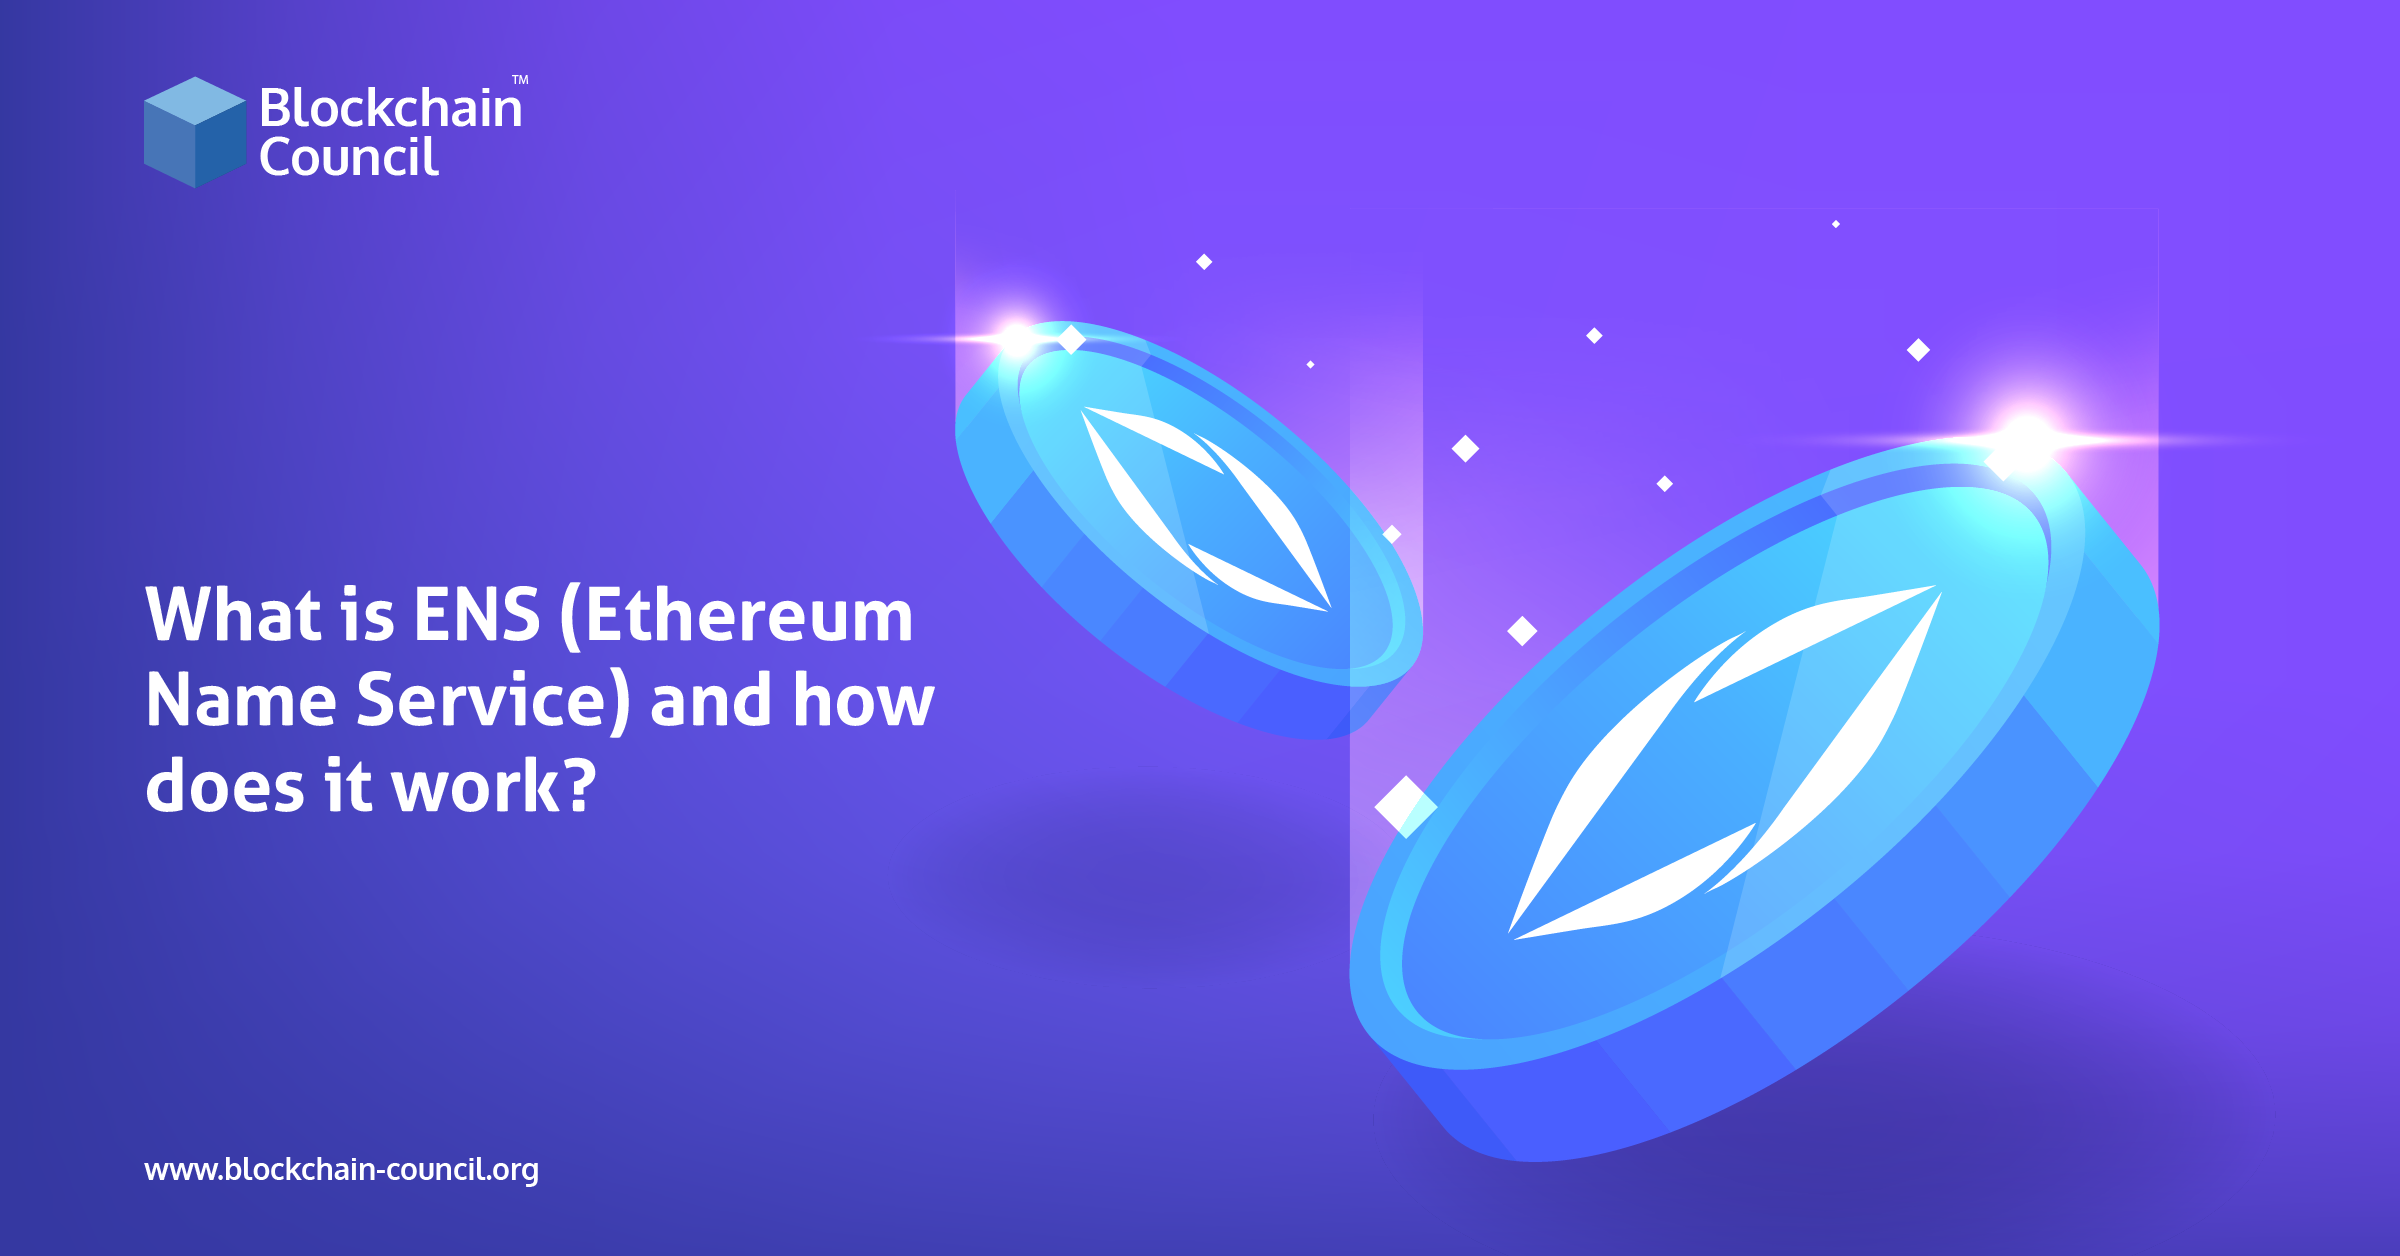 What is ENS (Ethereum Name Service) and how does it work